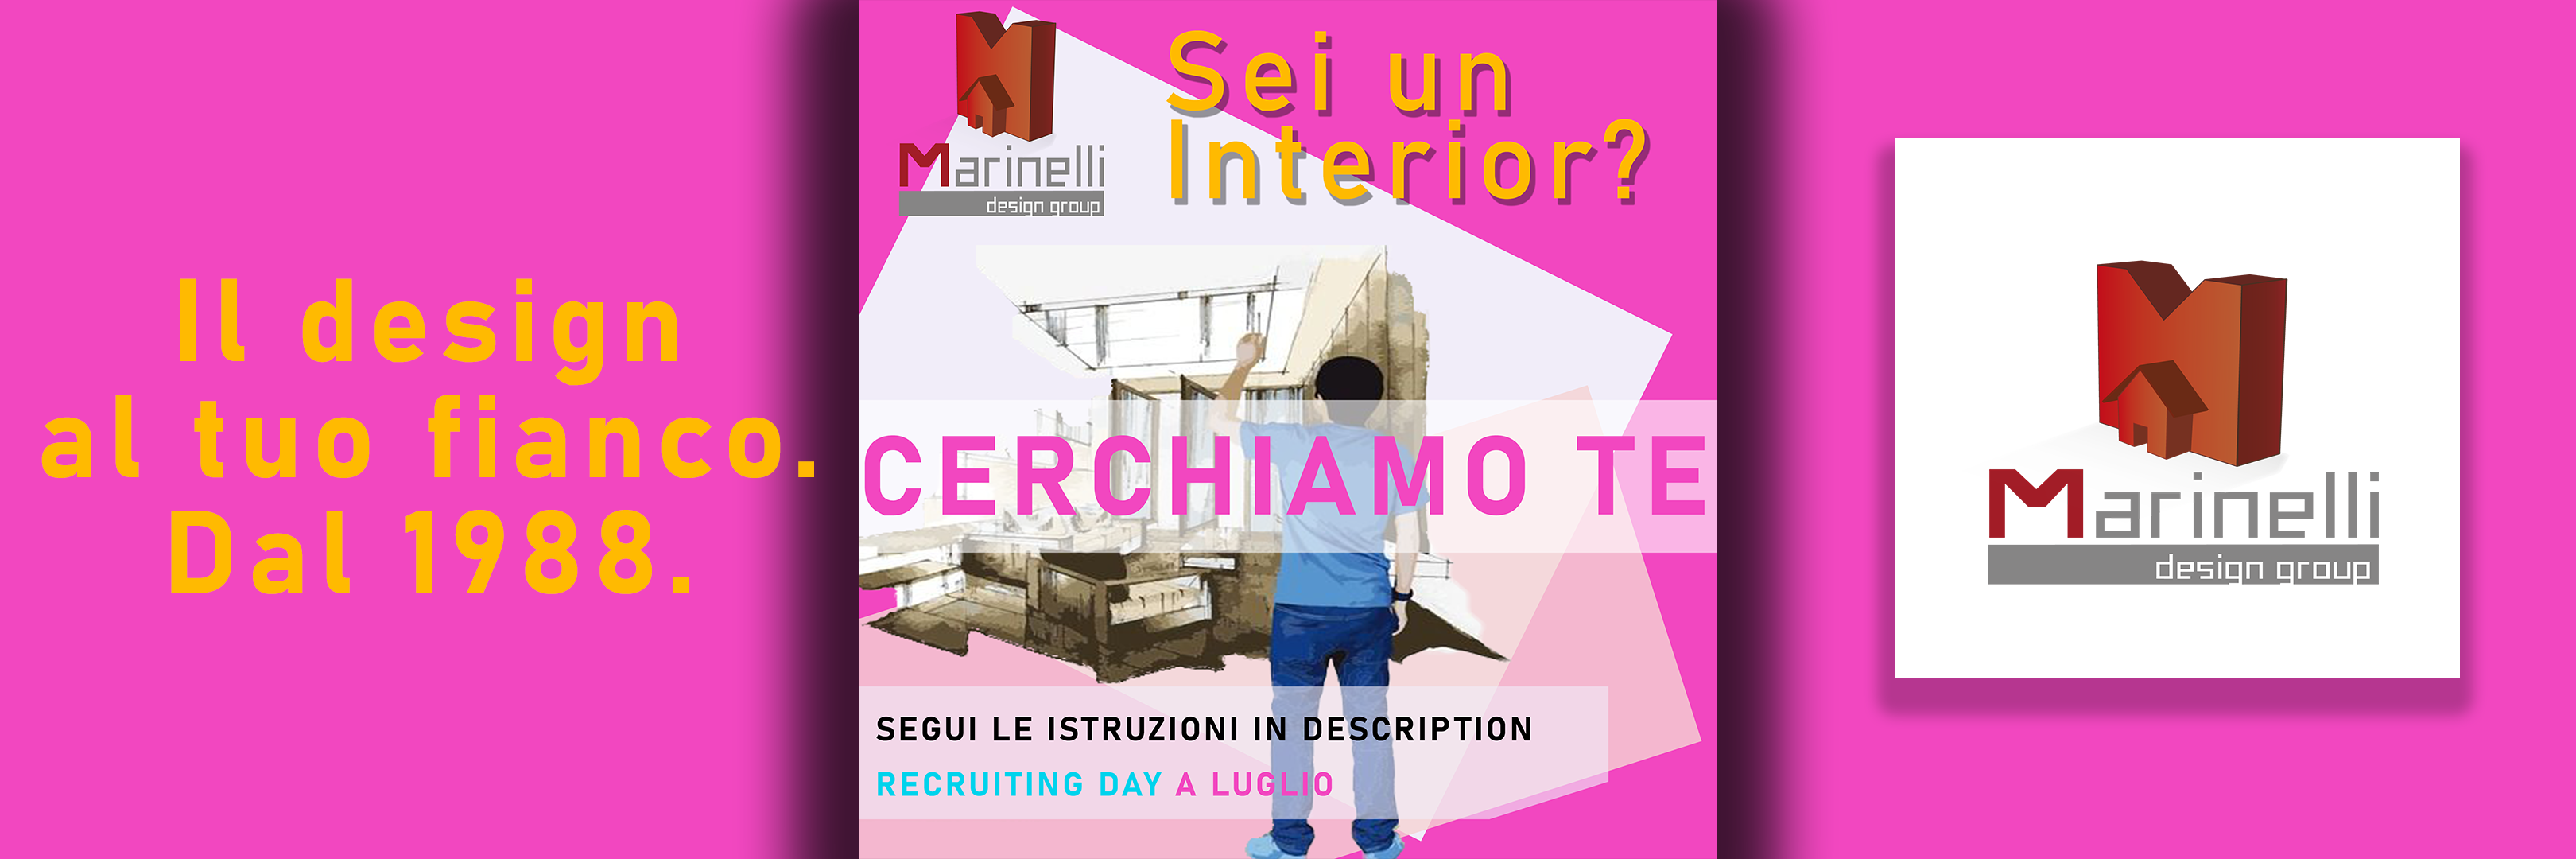 Recruiting Day Marinelli Design Group